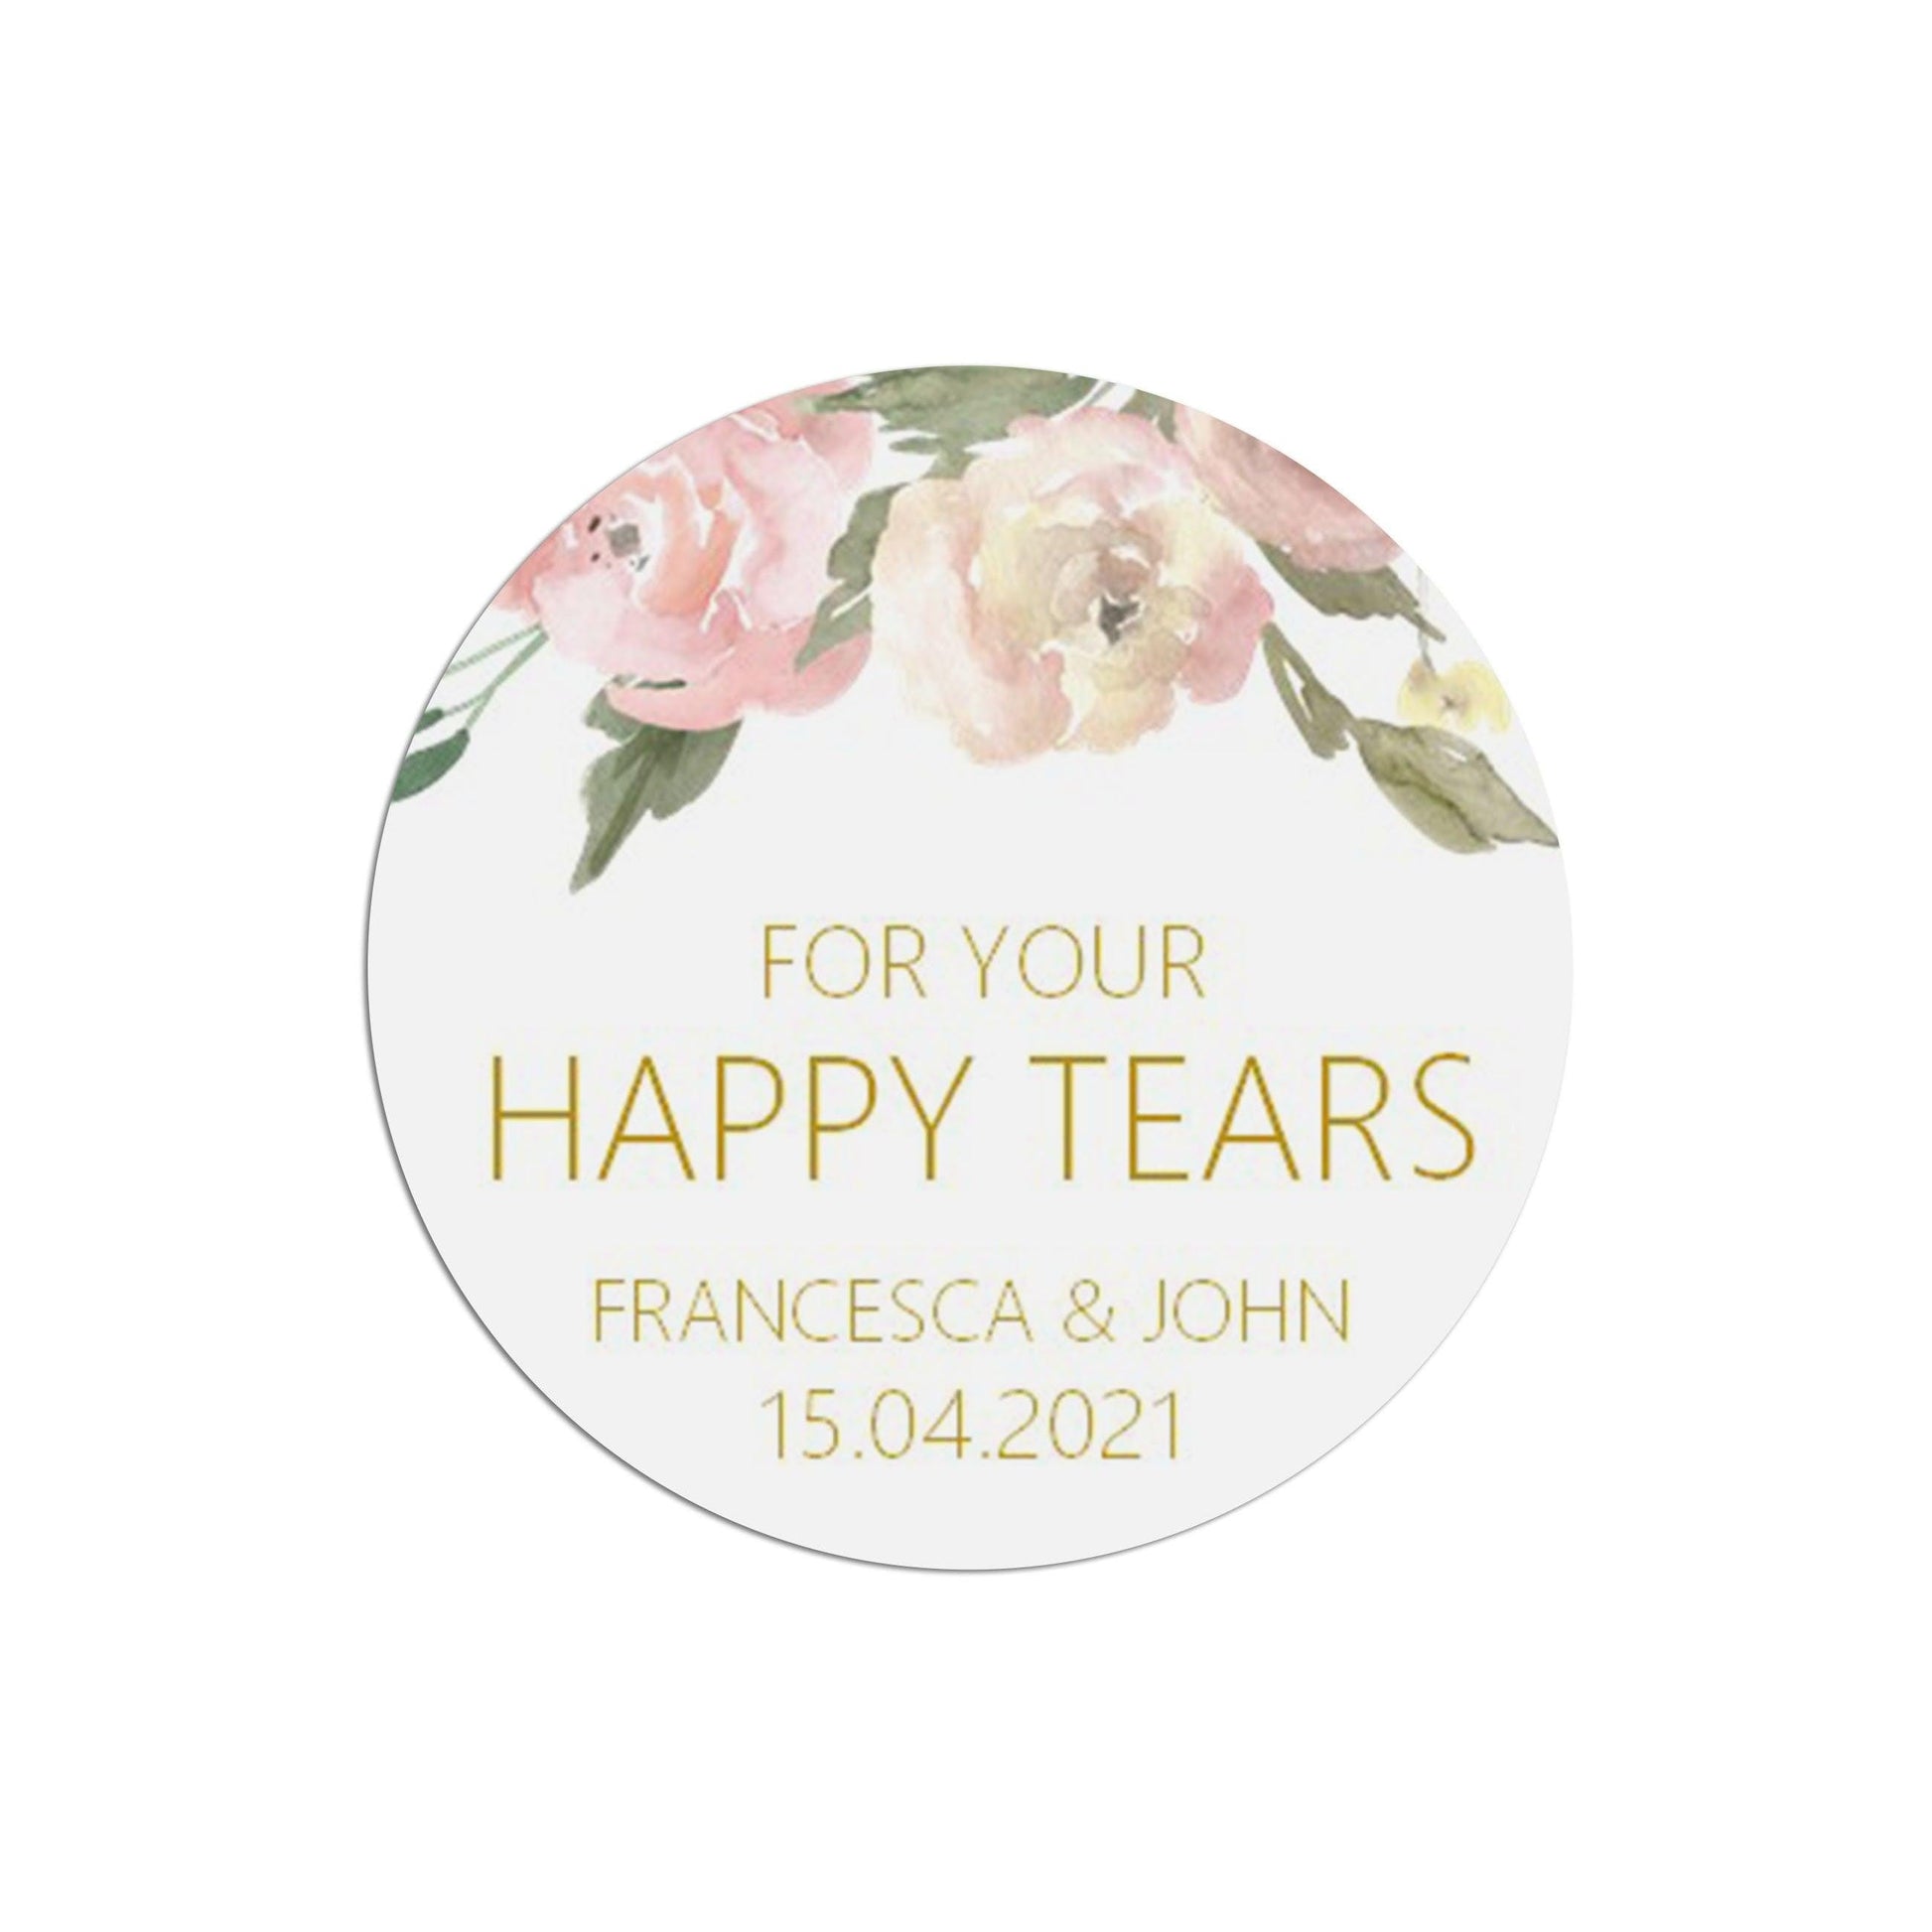  Happy Tears Tissues Wedding Stickers Blush Floral 37mm Round With Personalisation At The Bottom x 35 Stickers Per Sheet by PMPRINTED 